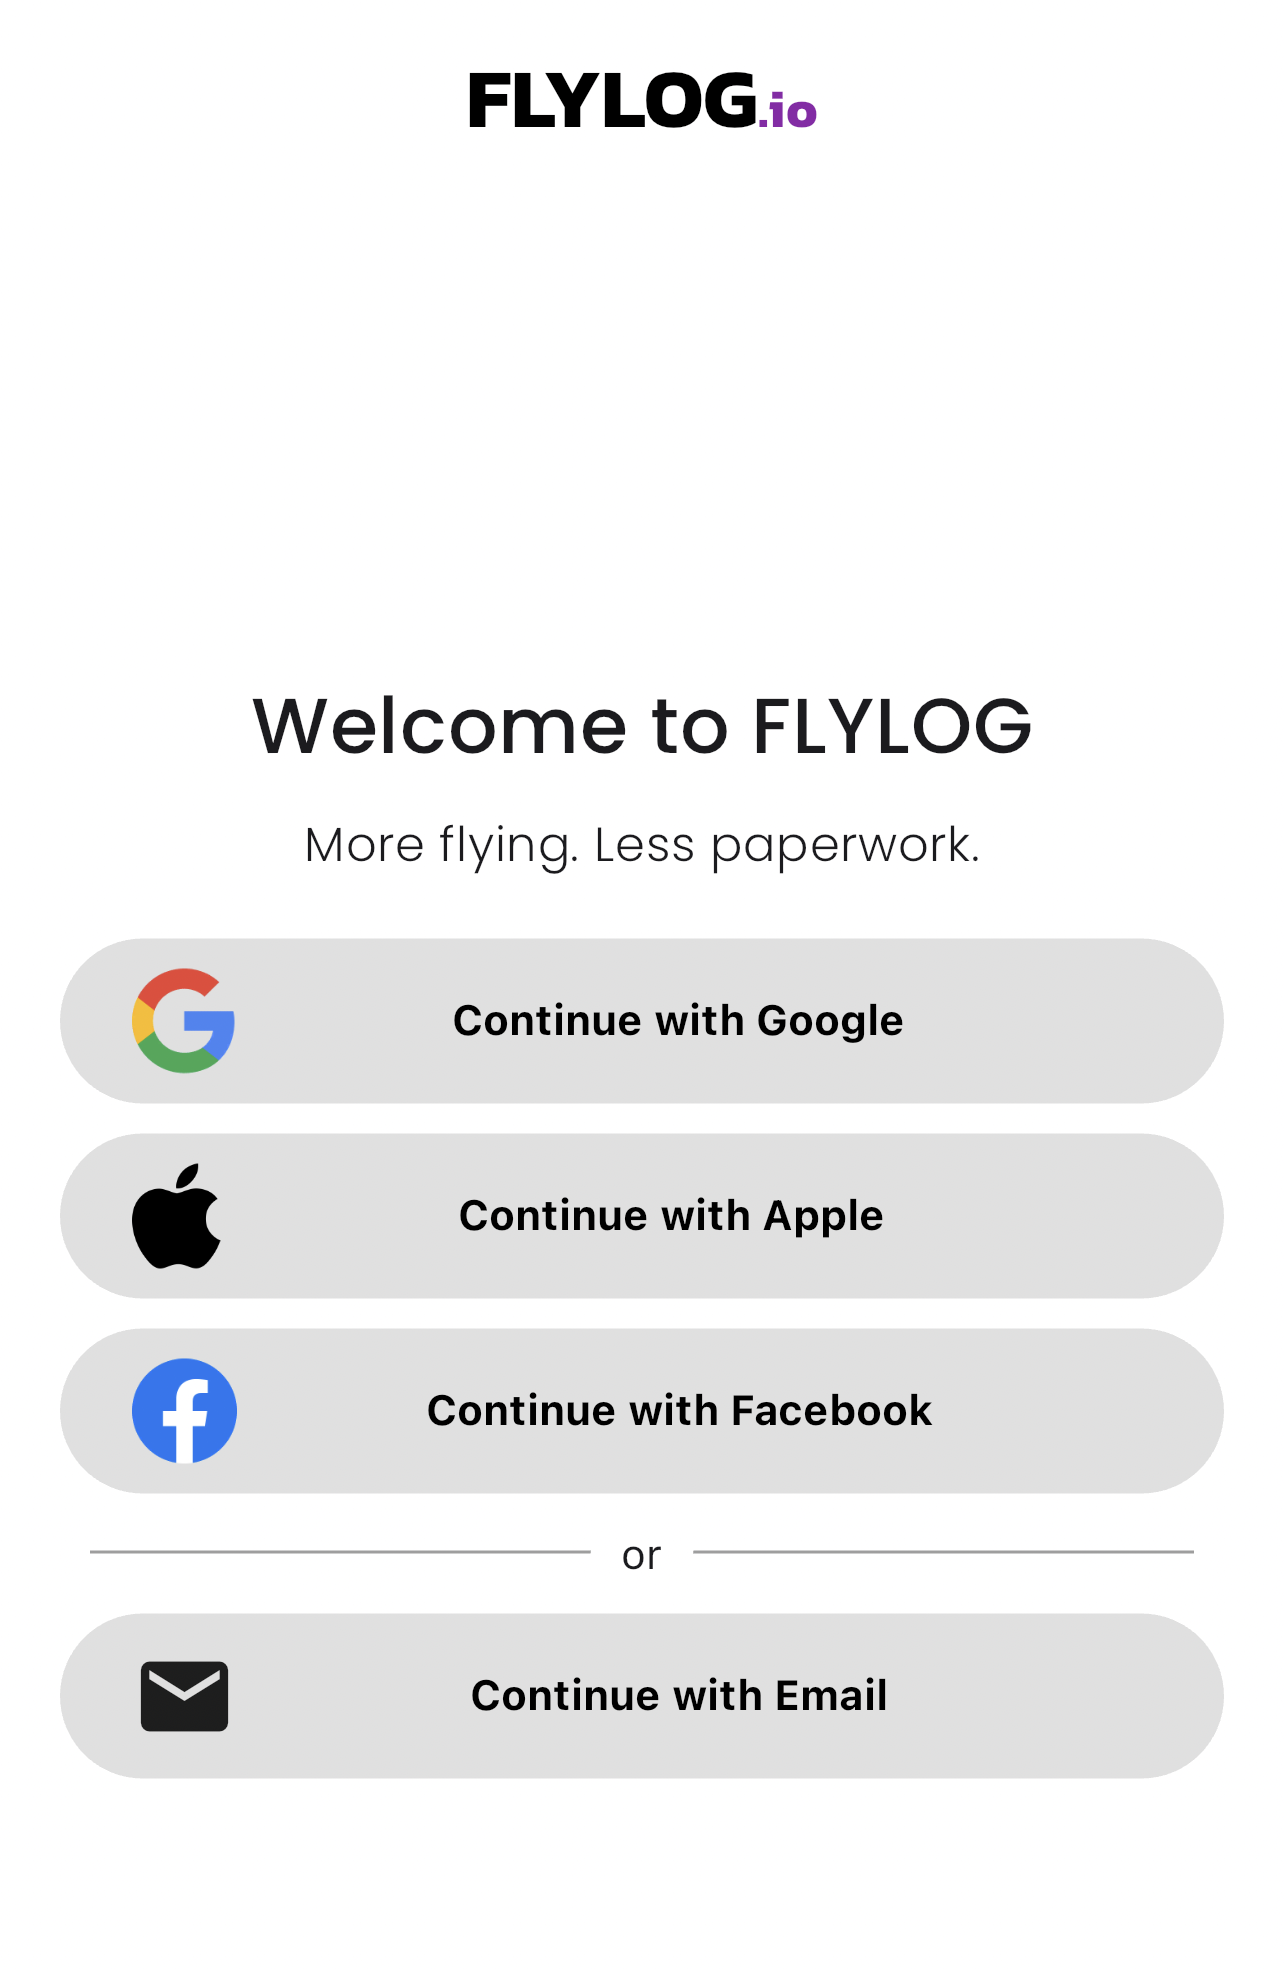 Log in with Google, Apple, or Facebook account